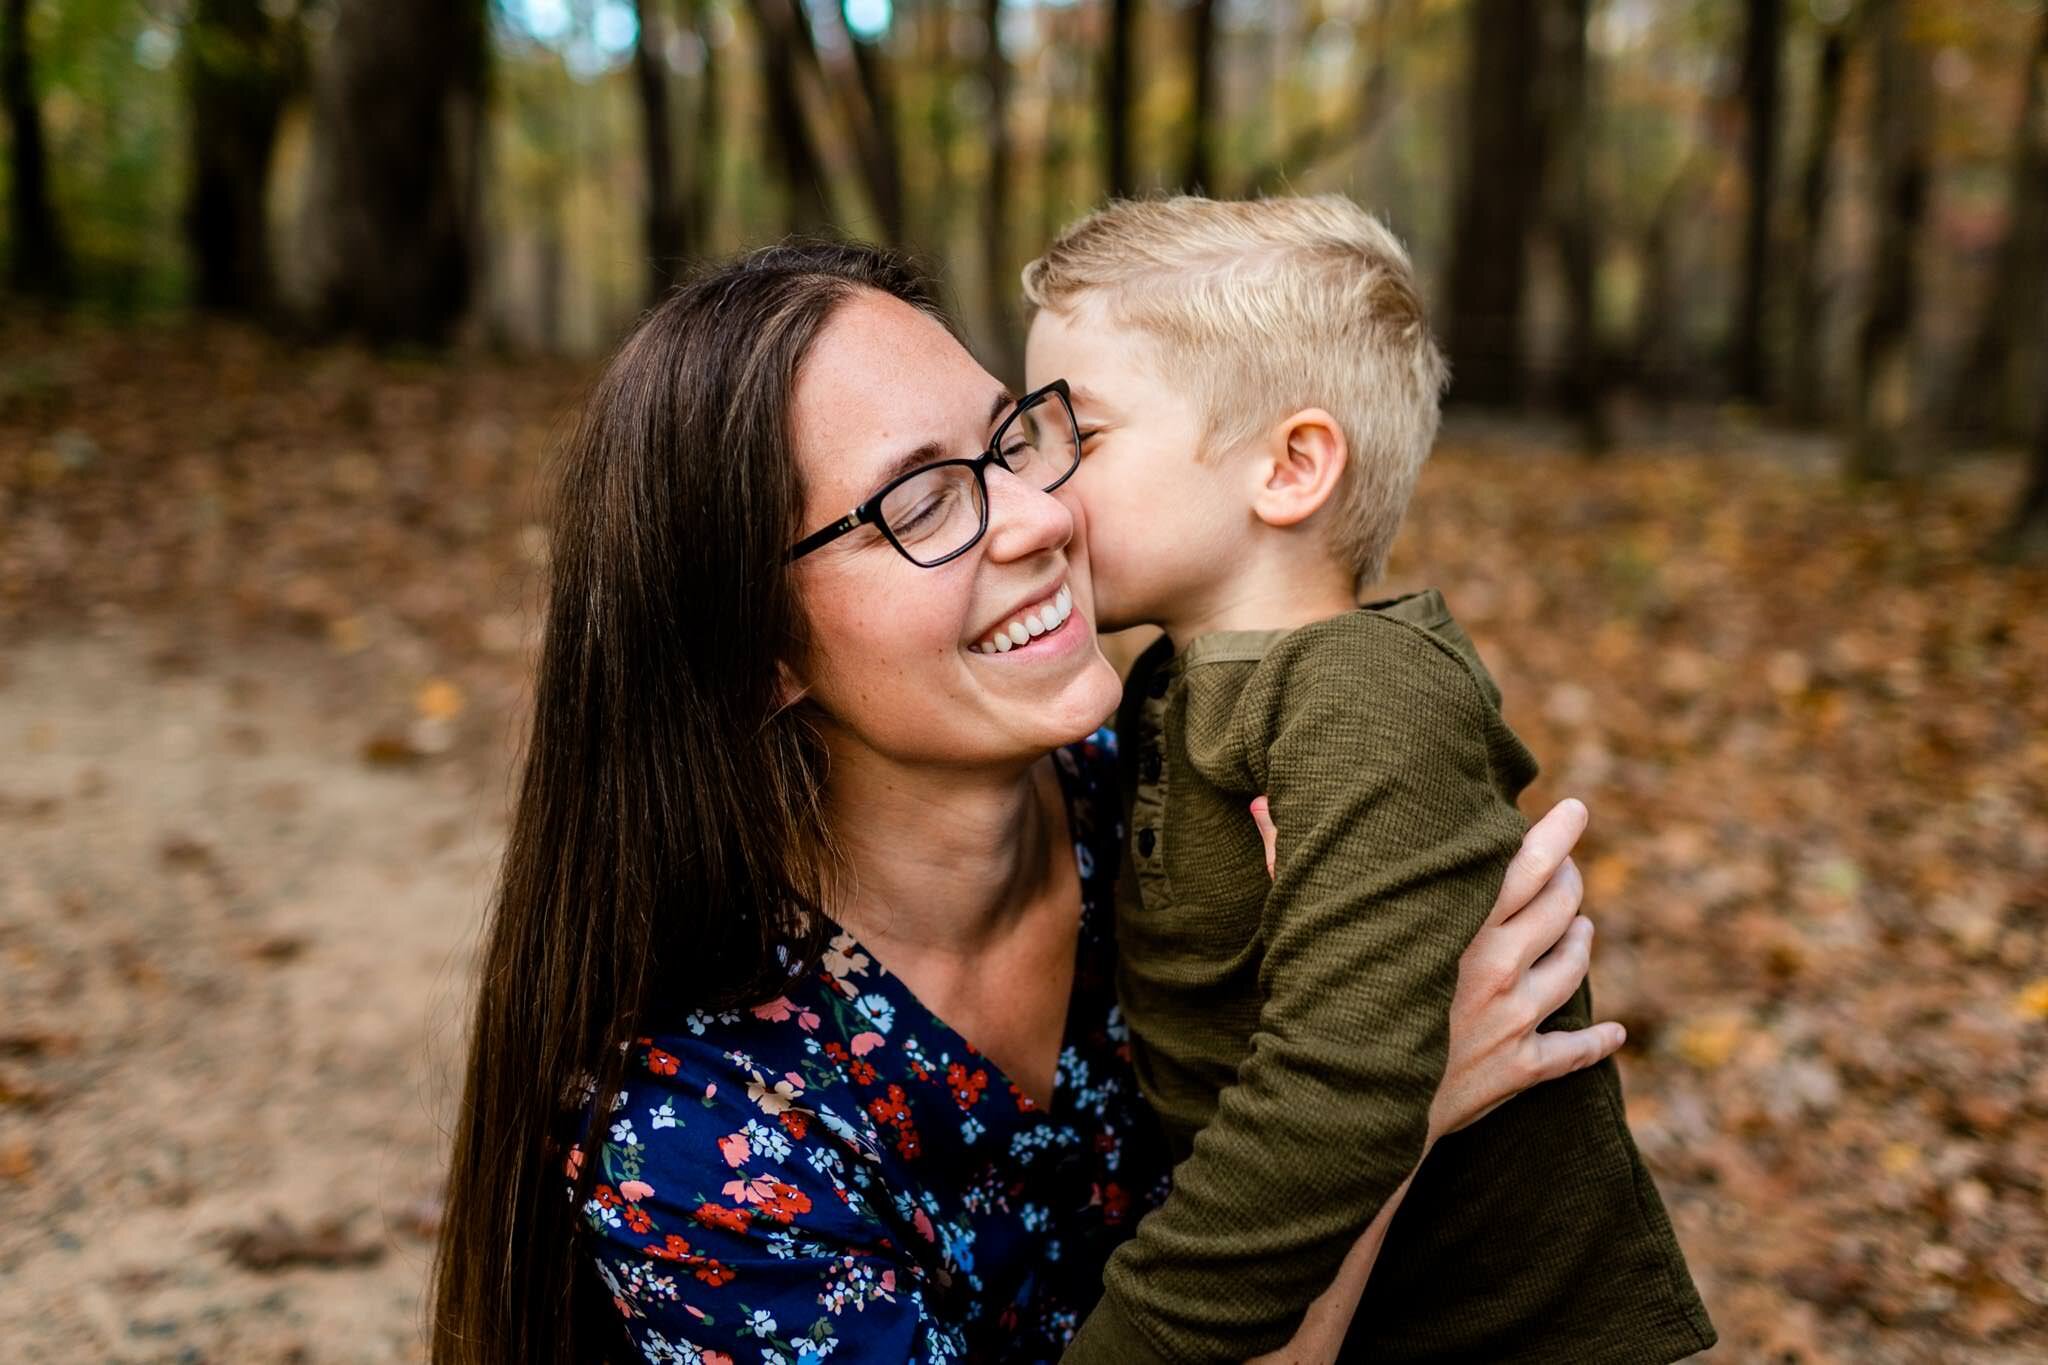 Raleigh Family Photographer at Umstead Park | By G. Lin Photography | Young boy giving mother a kiss